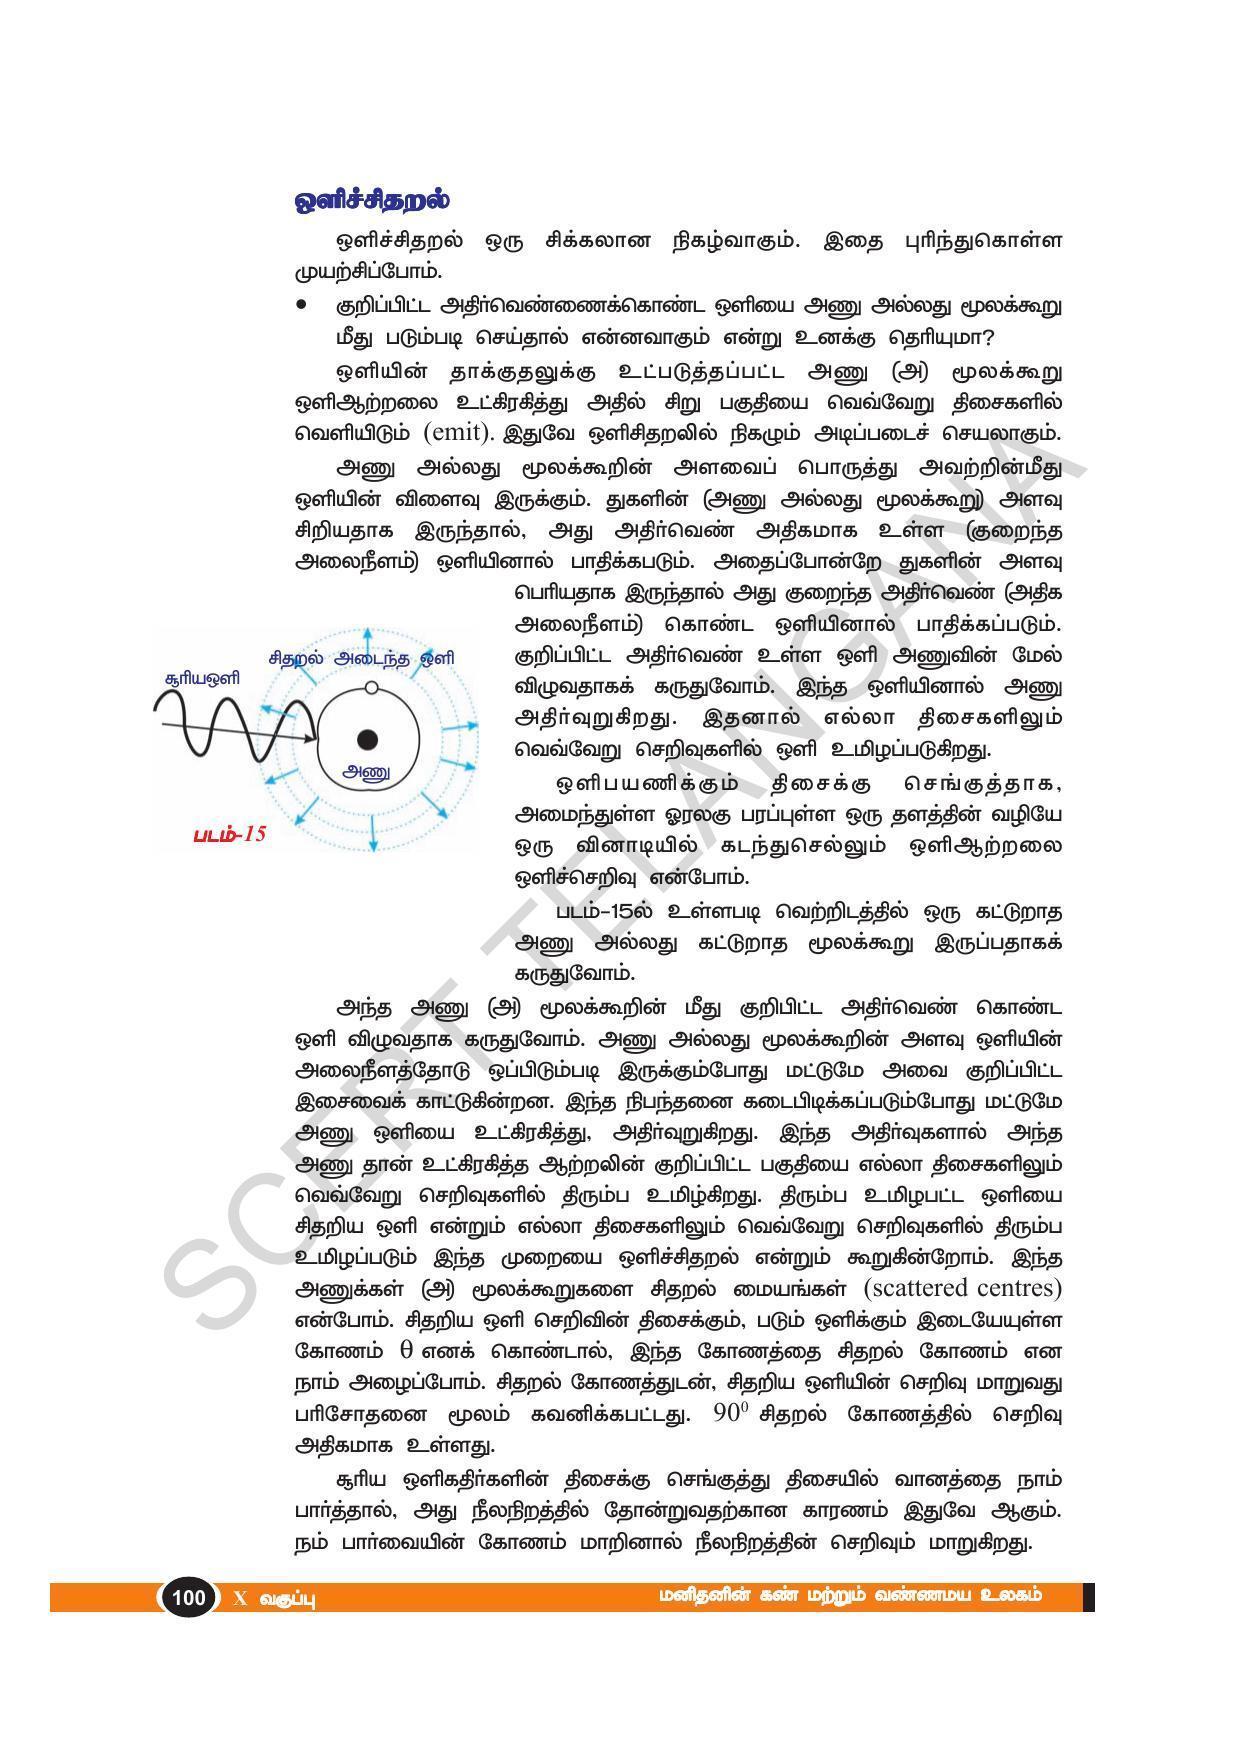 TS SCERT Class 10 Physical Science(Tamil Medium) Text Book - Page 112